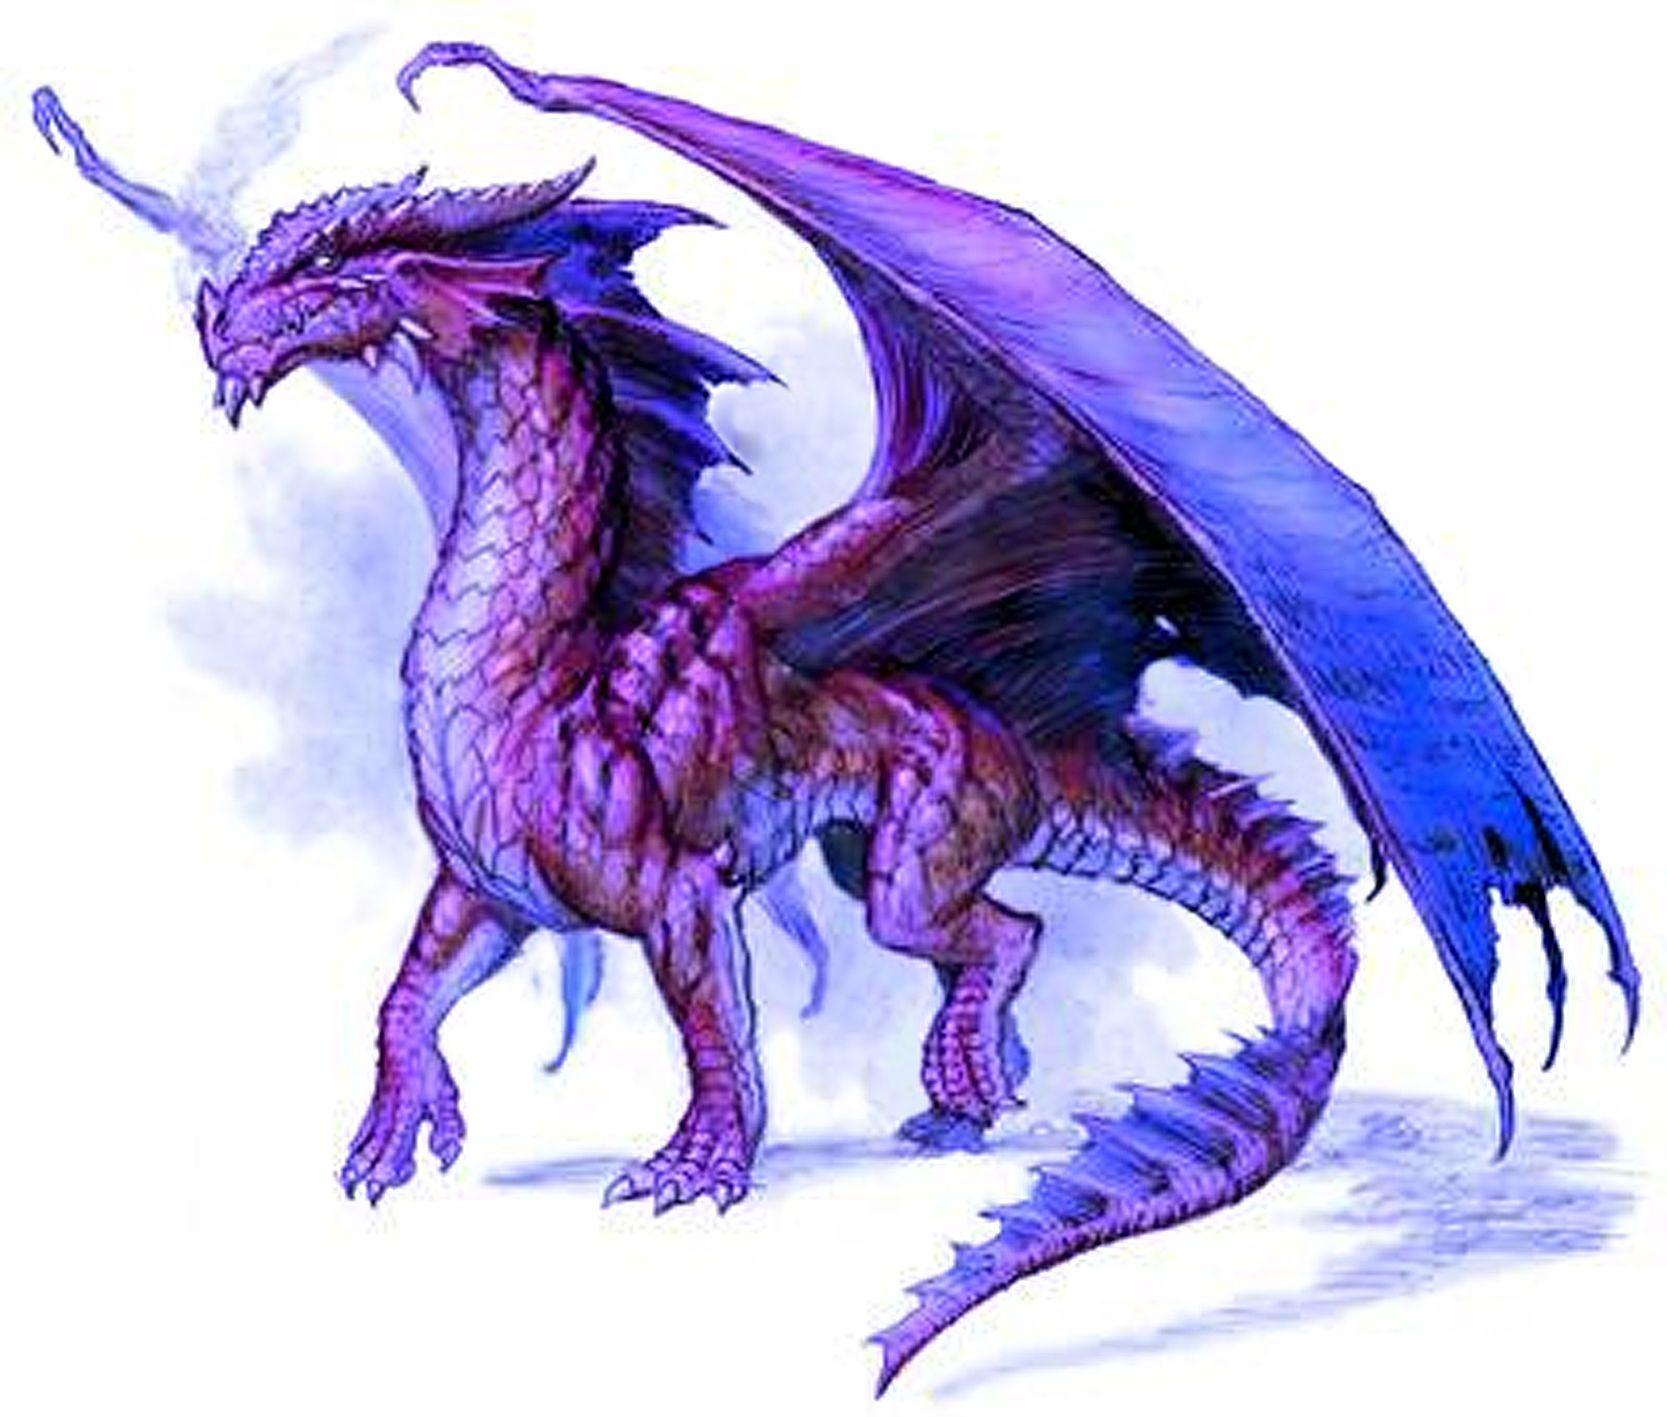 What Dragon Are You?. Black dragon, Dragon image and The purple